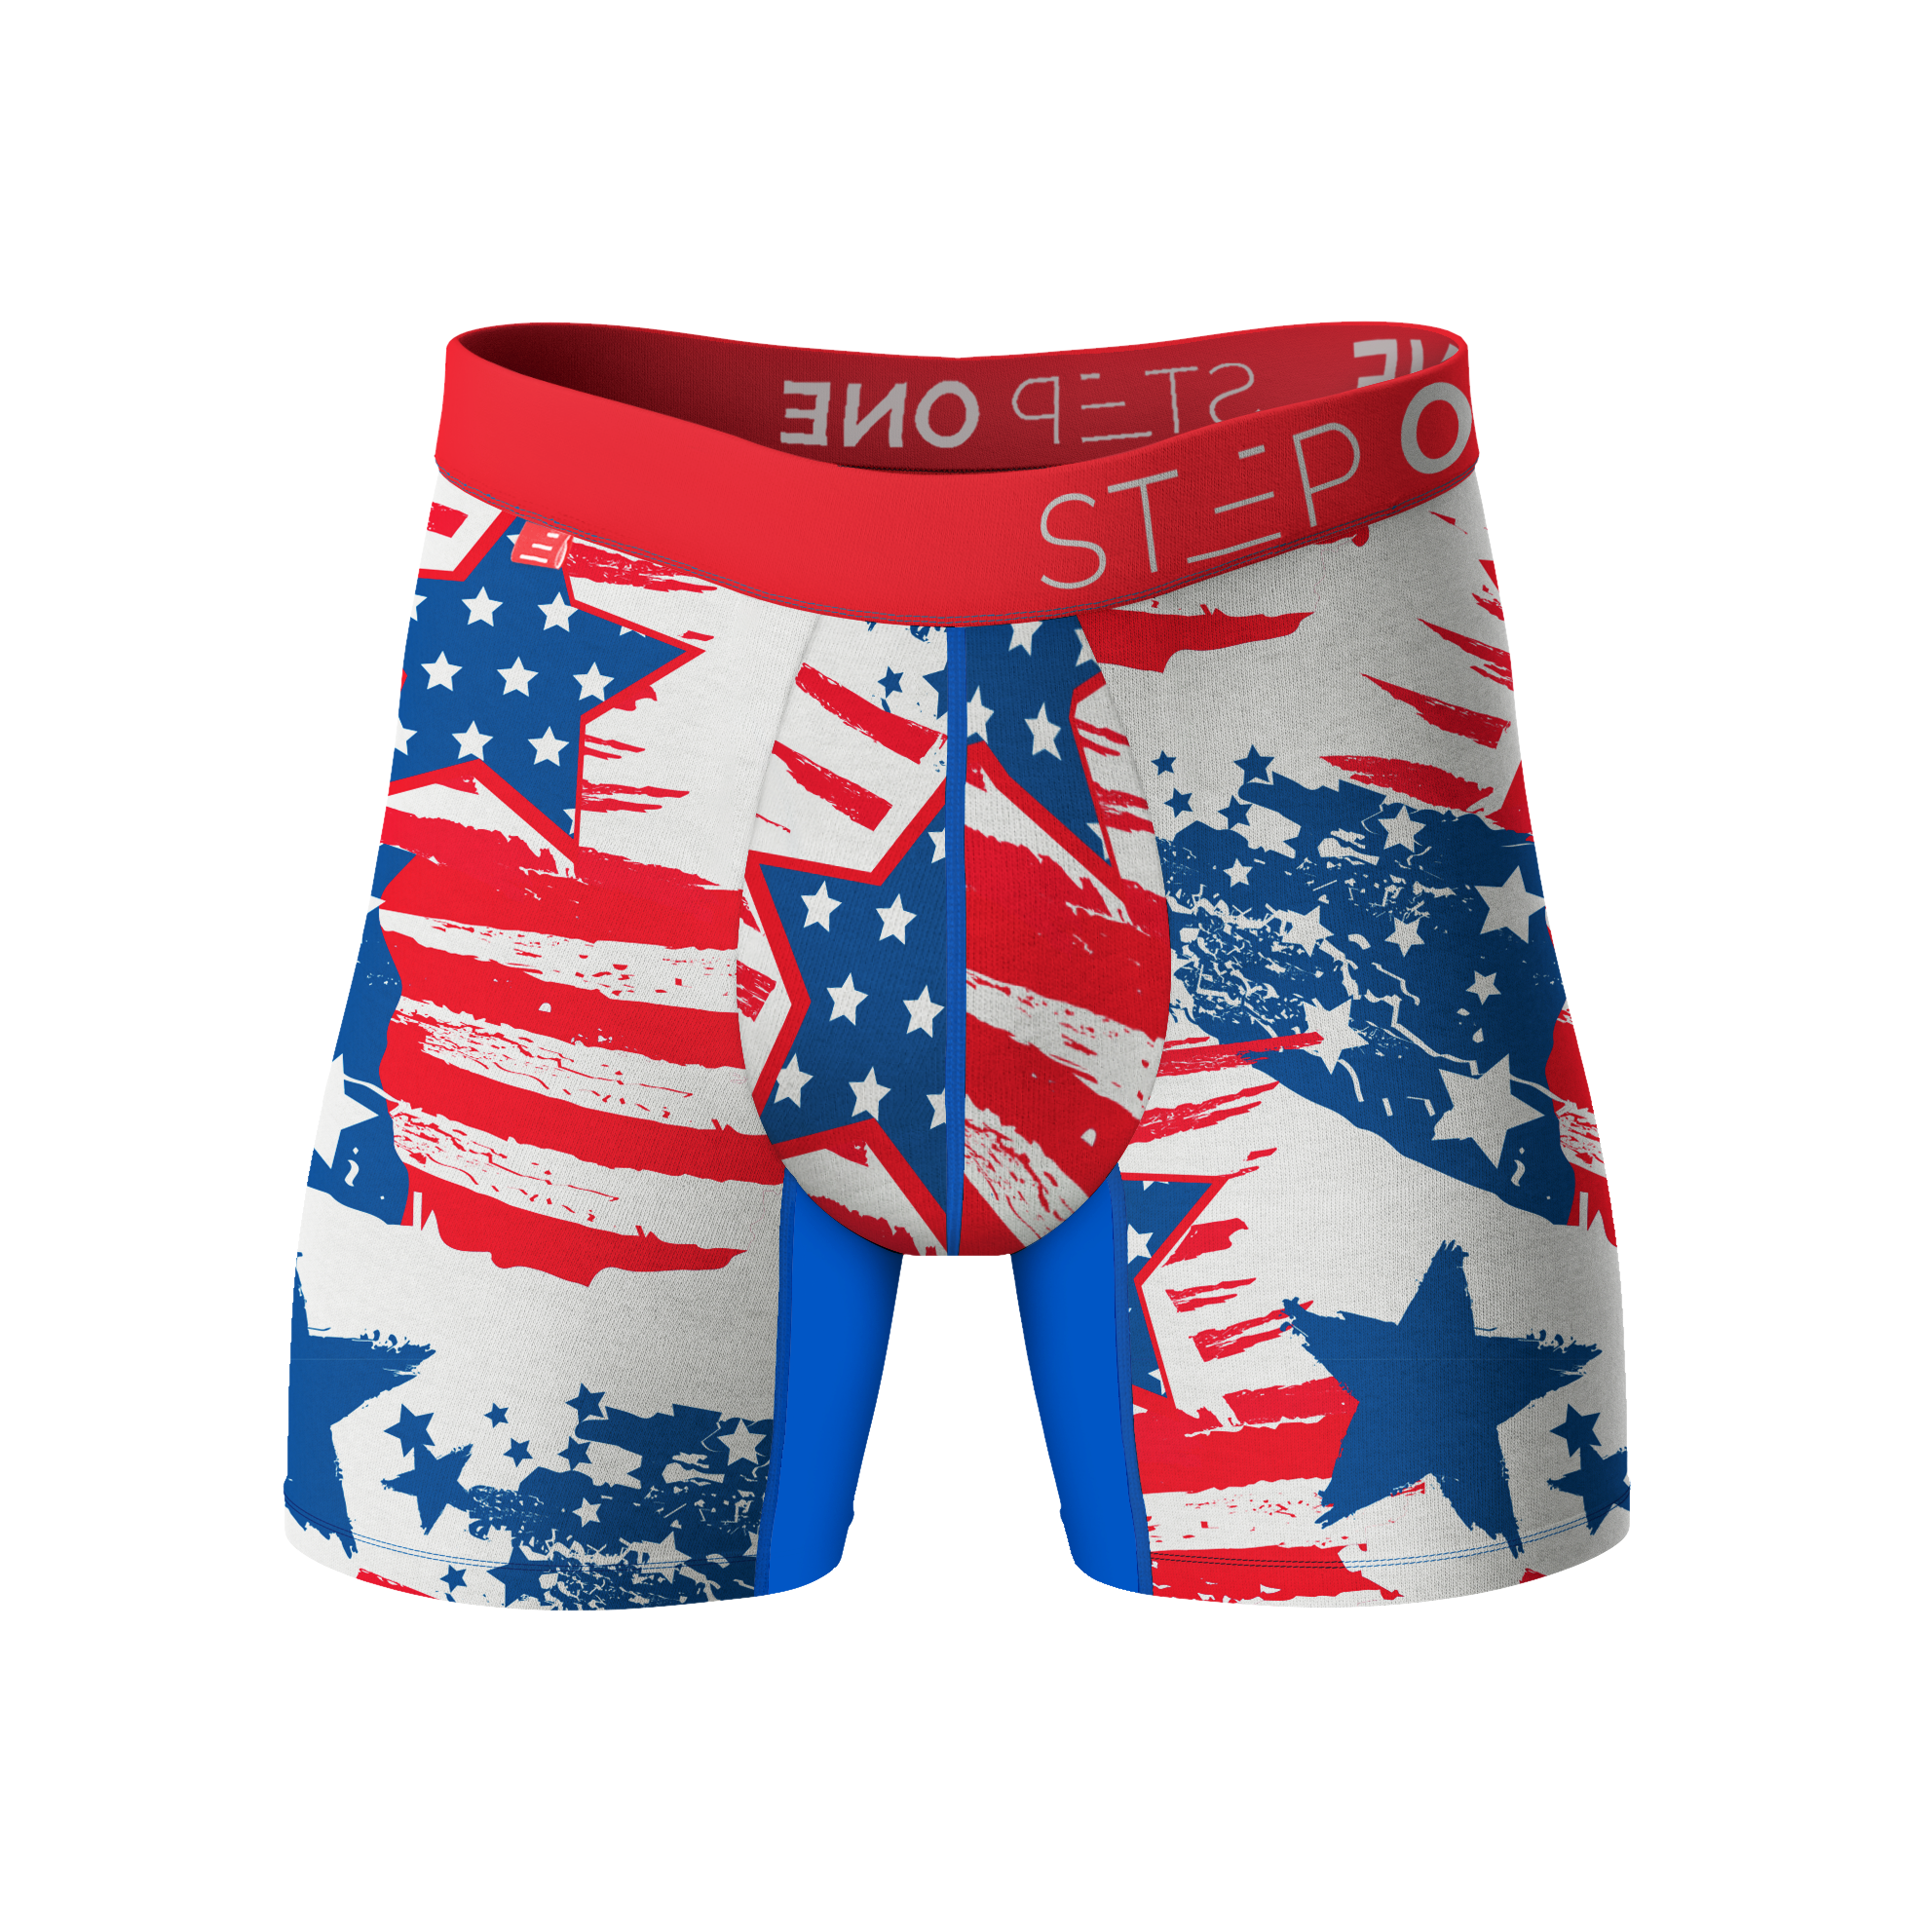 Boxer Brief - Yankee Doodles product